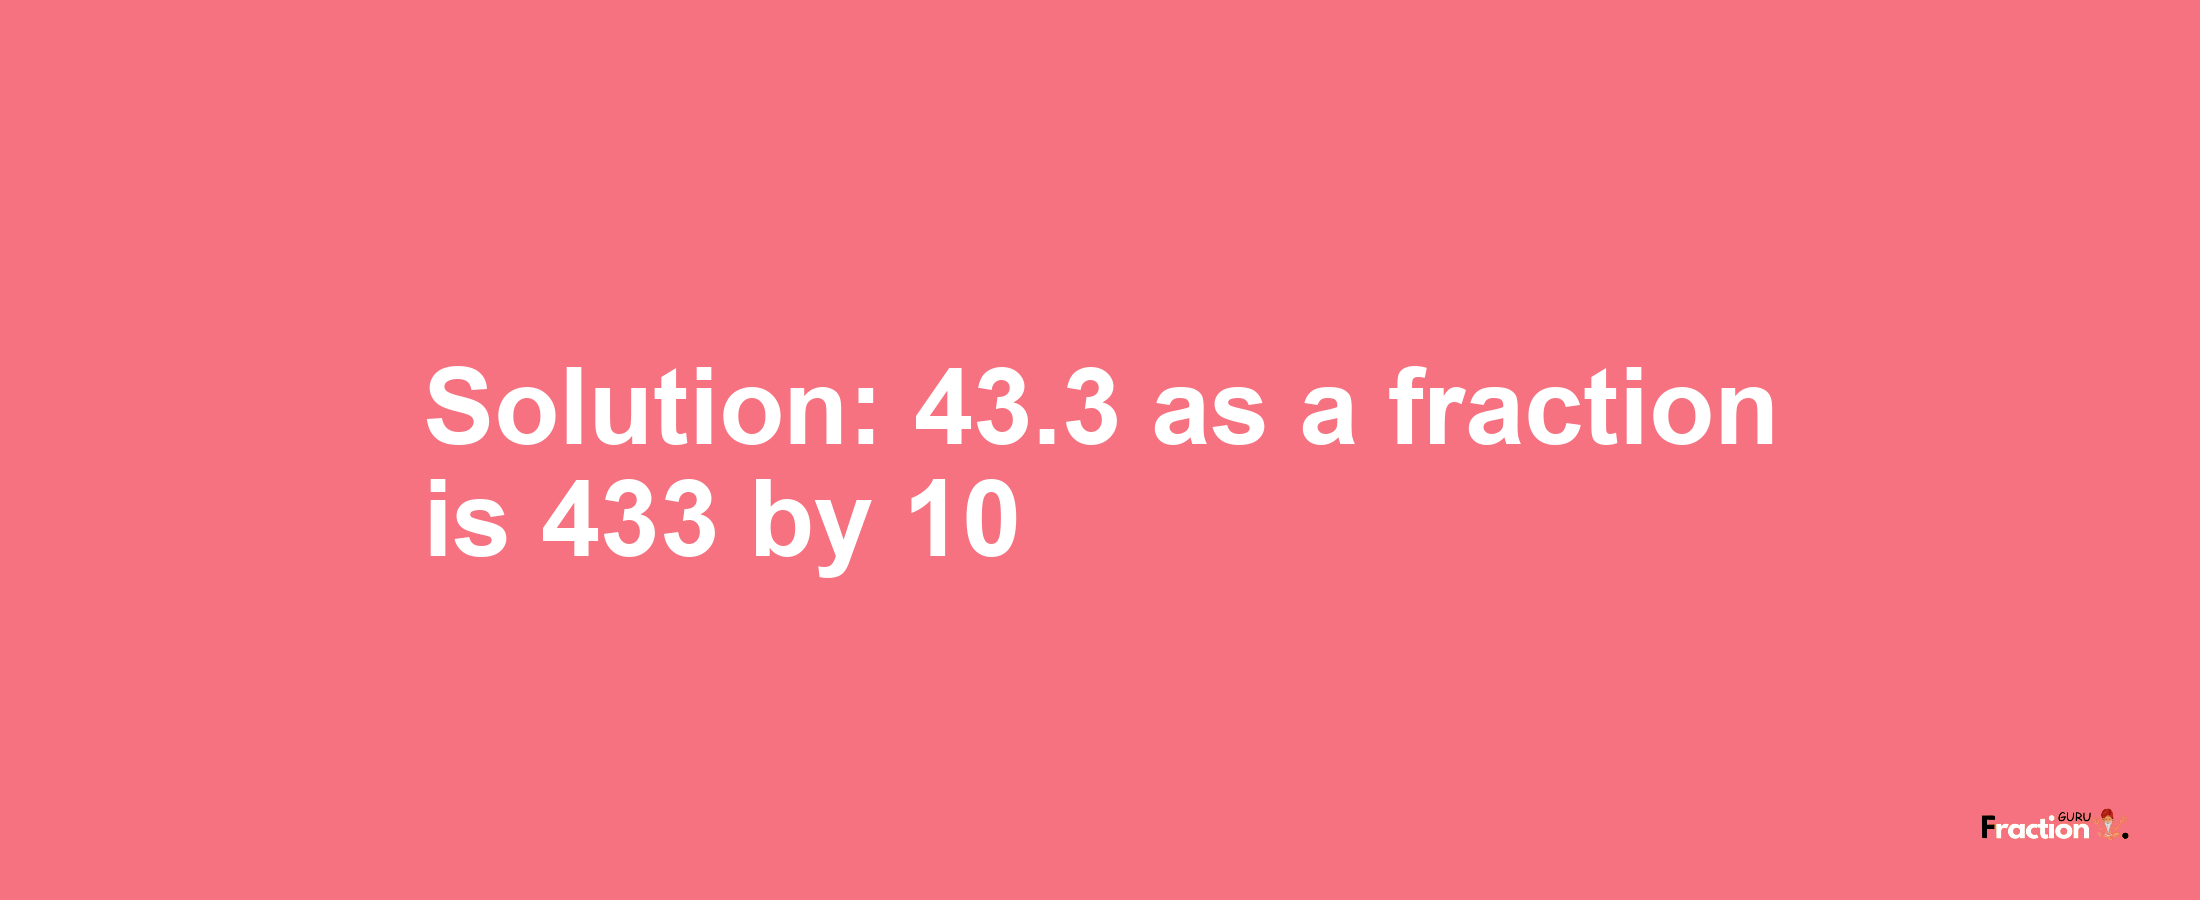 Solution:43.3 as a fraction is 433/10